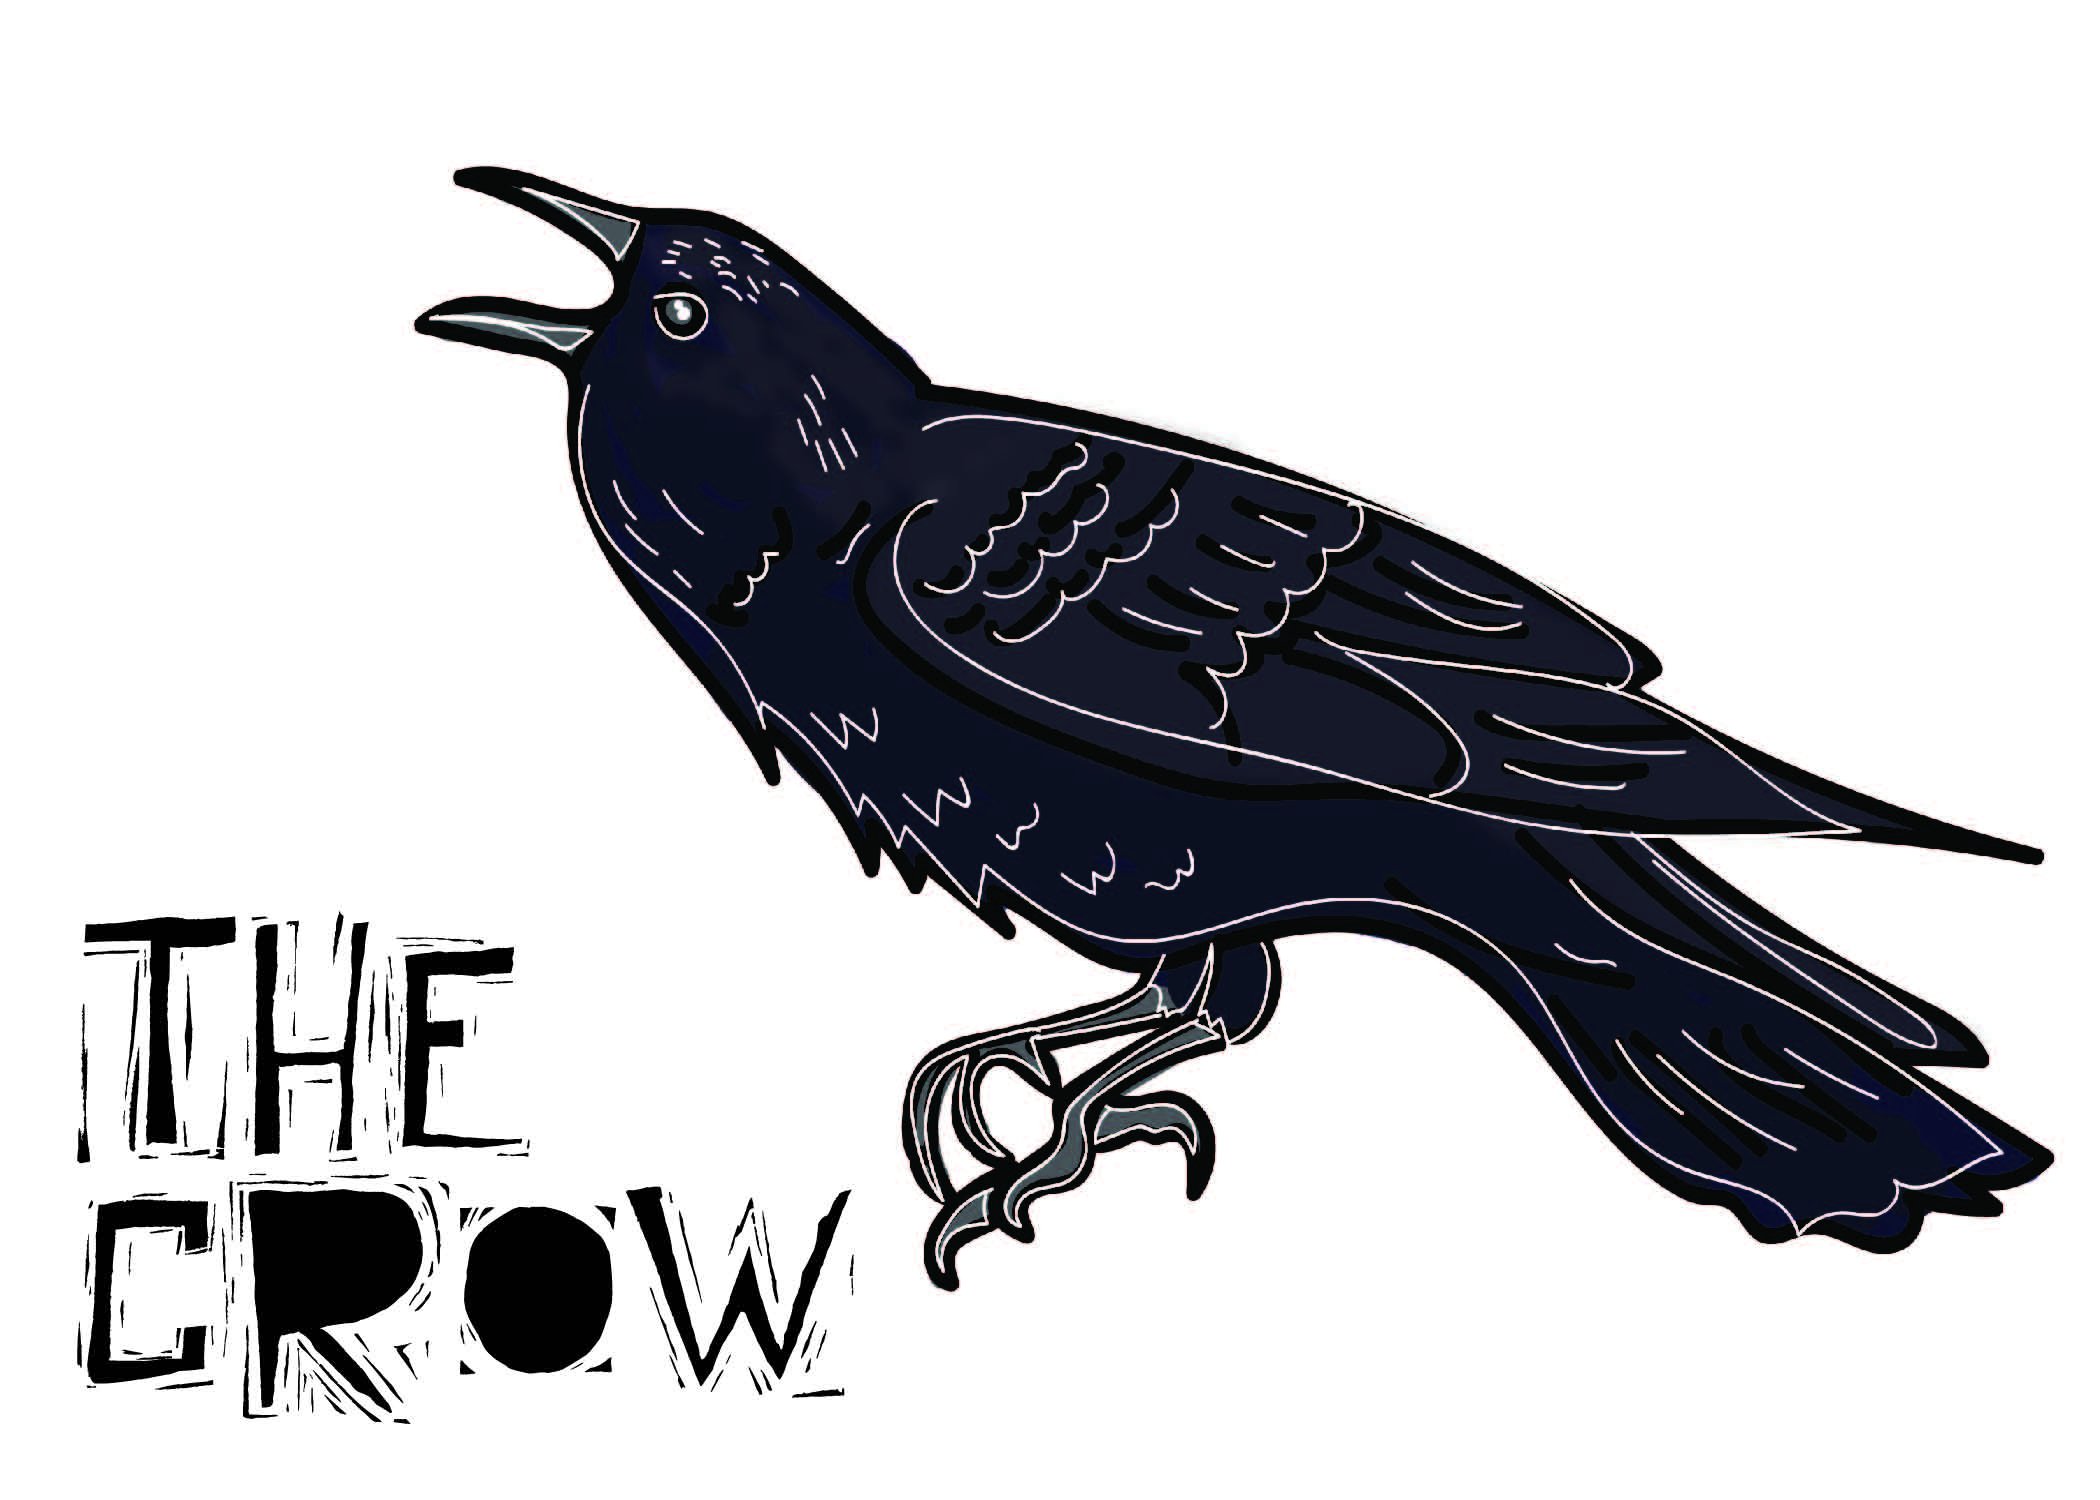 Crow cover image.